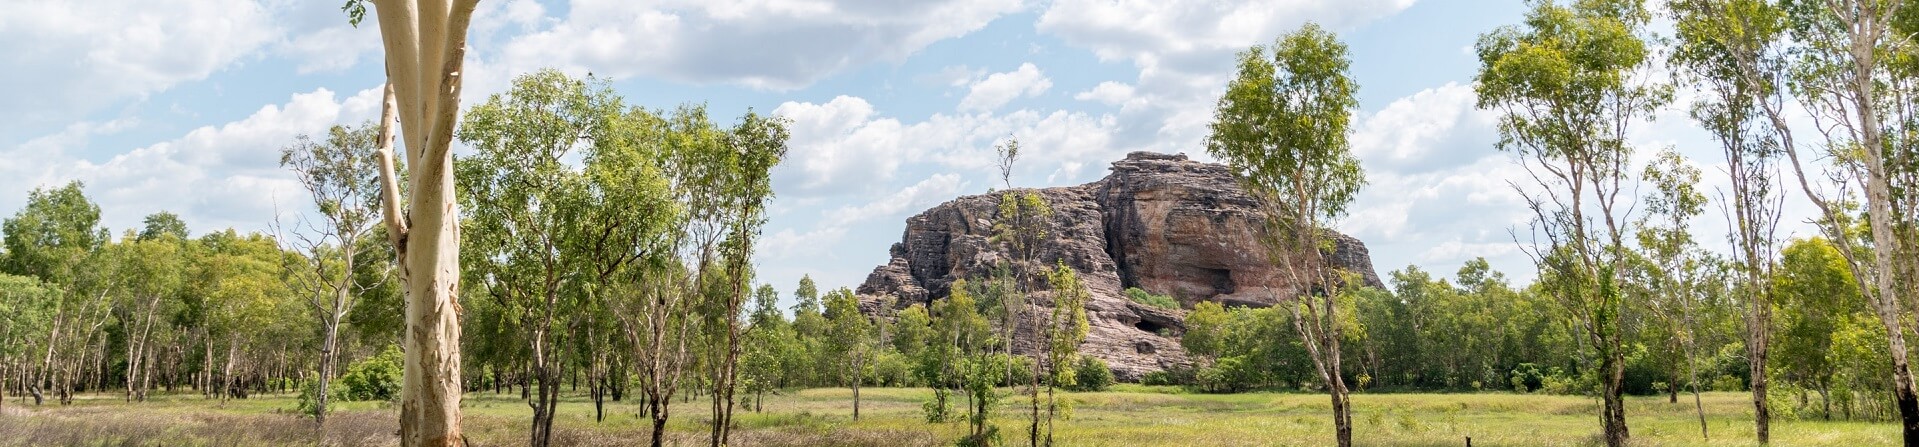 Does Kakadu get cold at night?